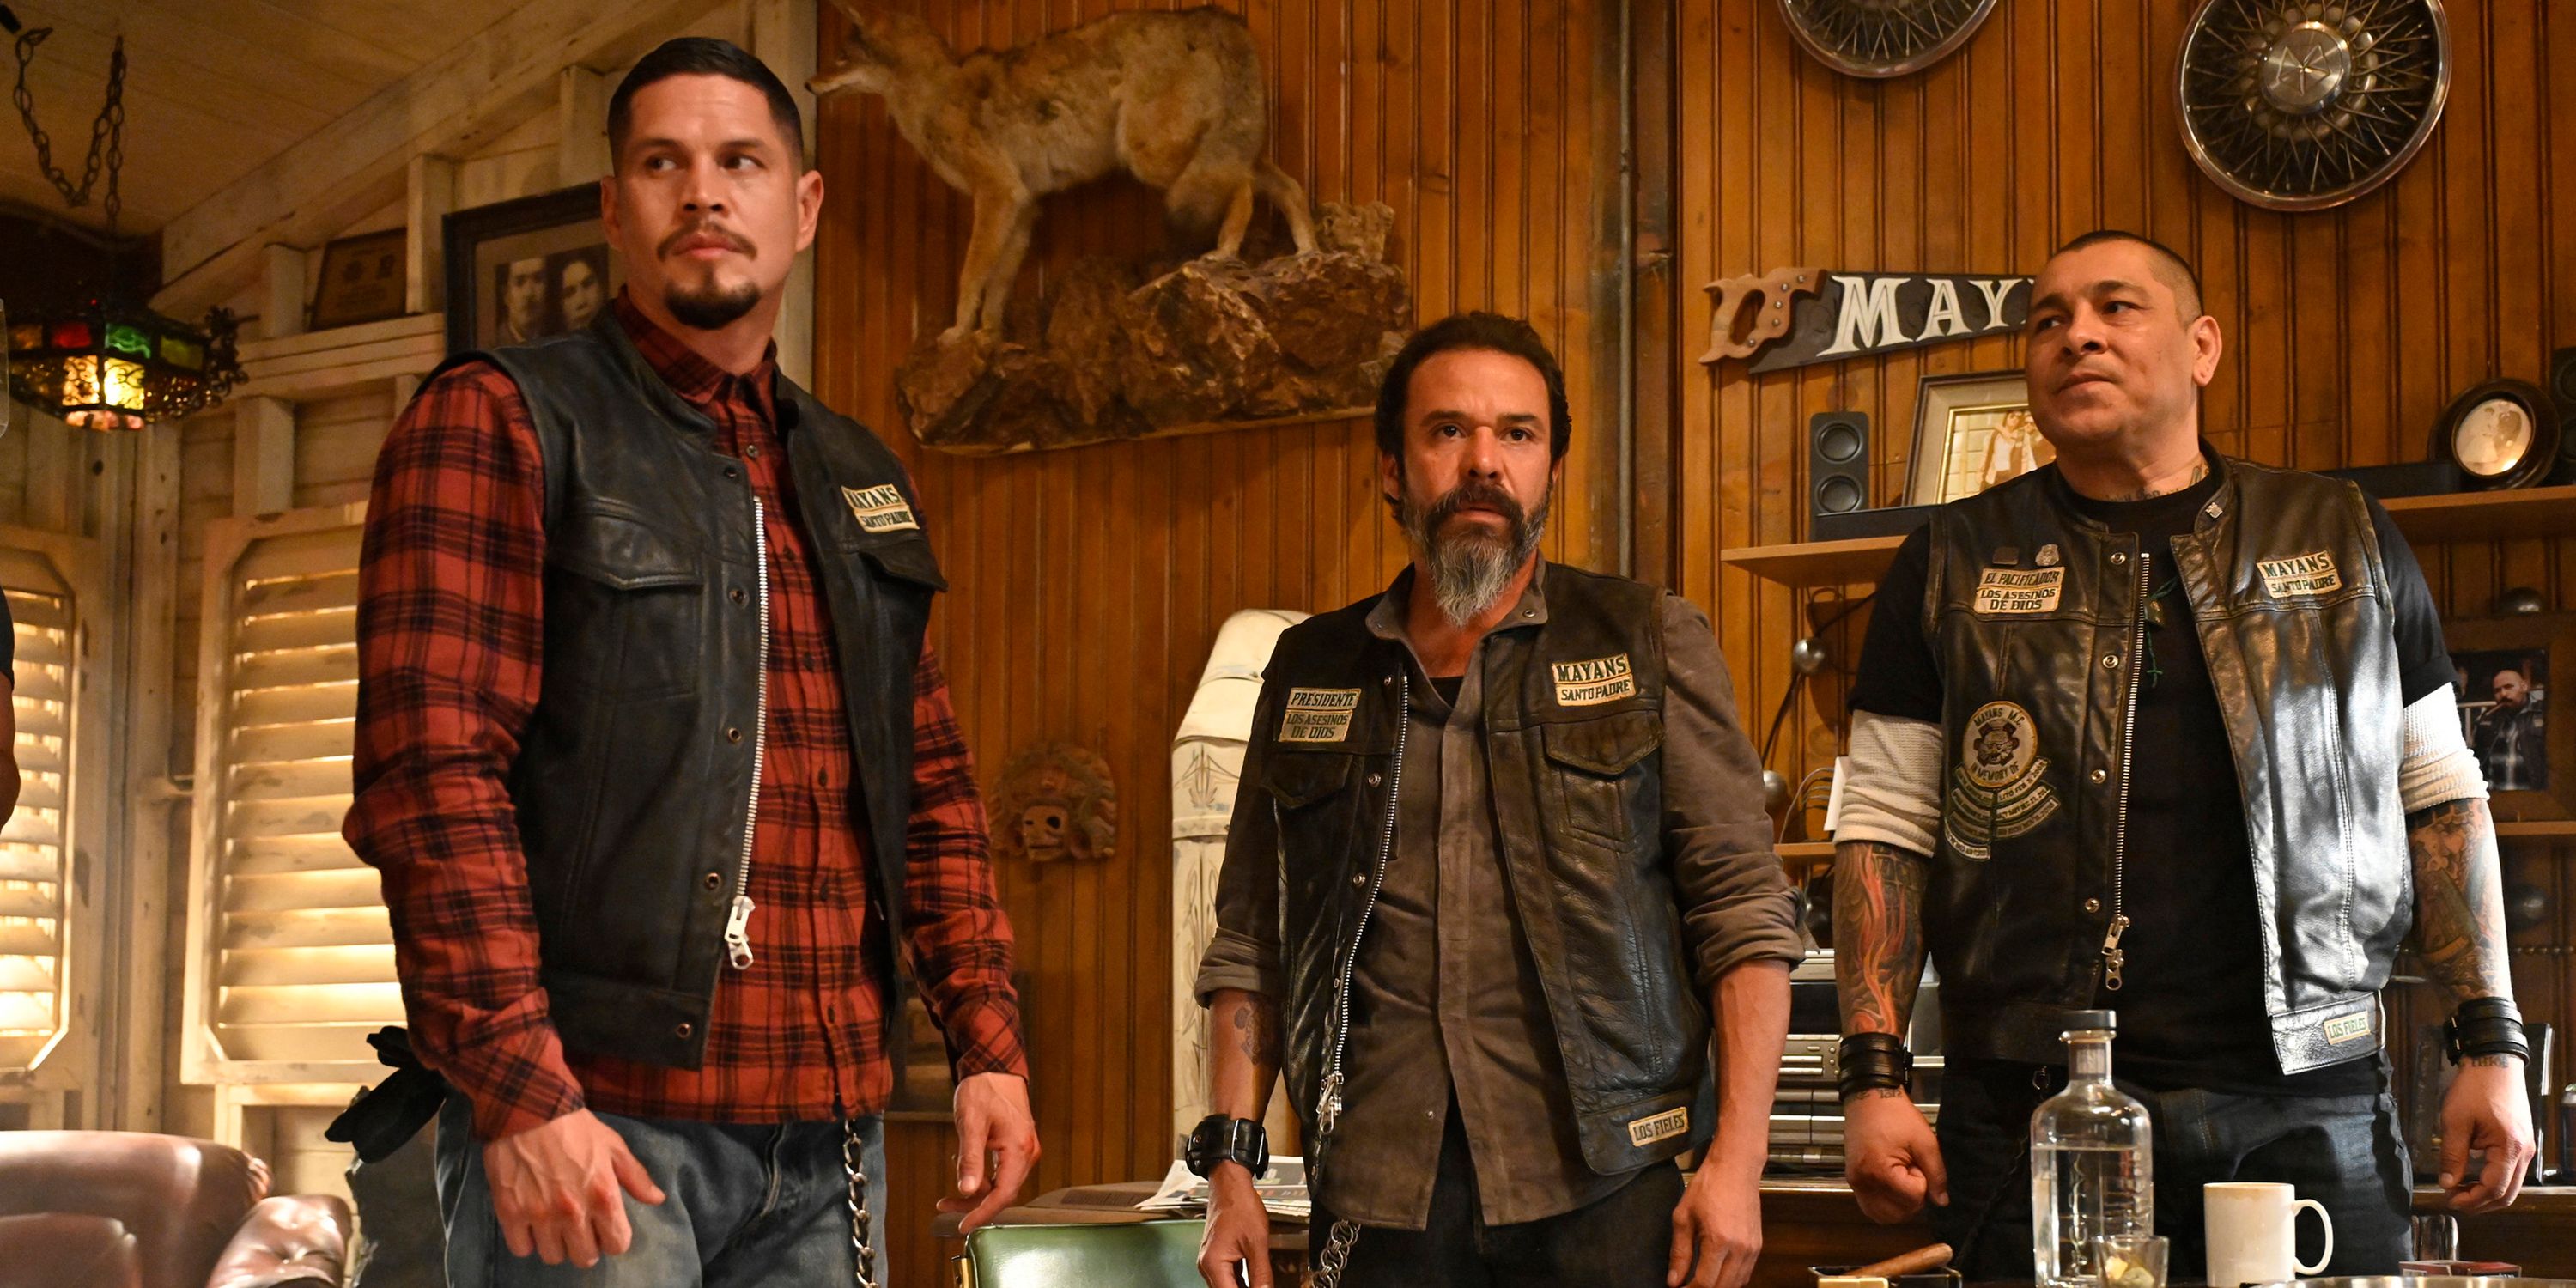 MAYANS M.C. -- &quot;Chapter the Last, Nothing More to Write&quot; -- Season 3, Episode 10 (Airs May 11) Pictured: (l-r) JD Pardo as EZ Reyes, Michael Irby as Obispo &quot;Bishop&quot; Losa, Frankie Loyal as Hank &quot;Tranq&quot; Loza. CR: Prashant Gupta/FX